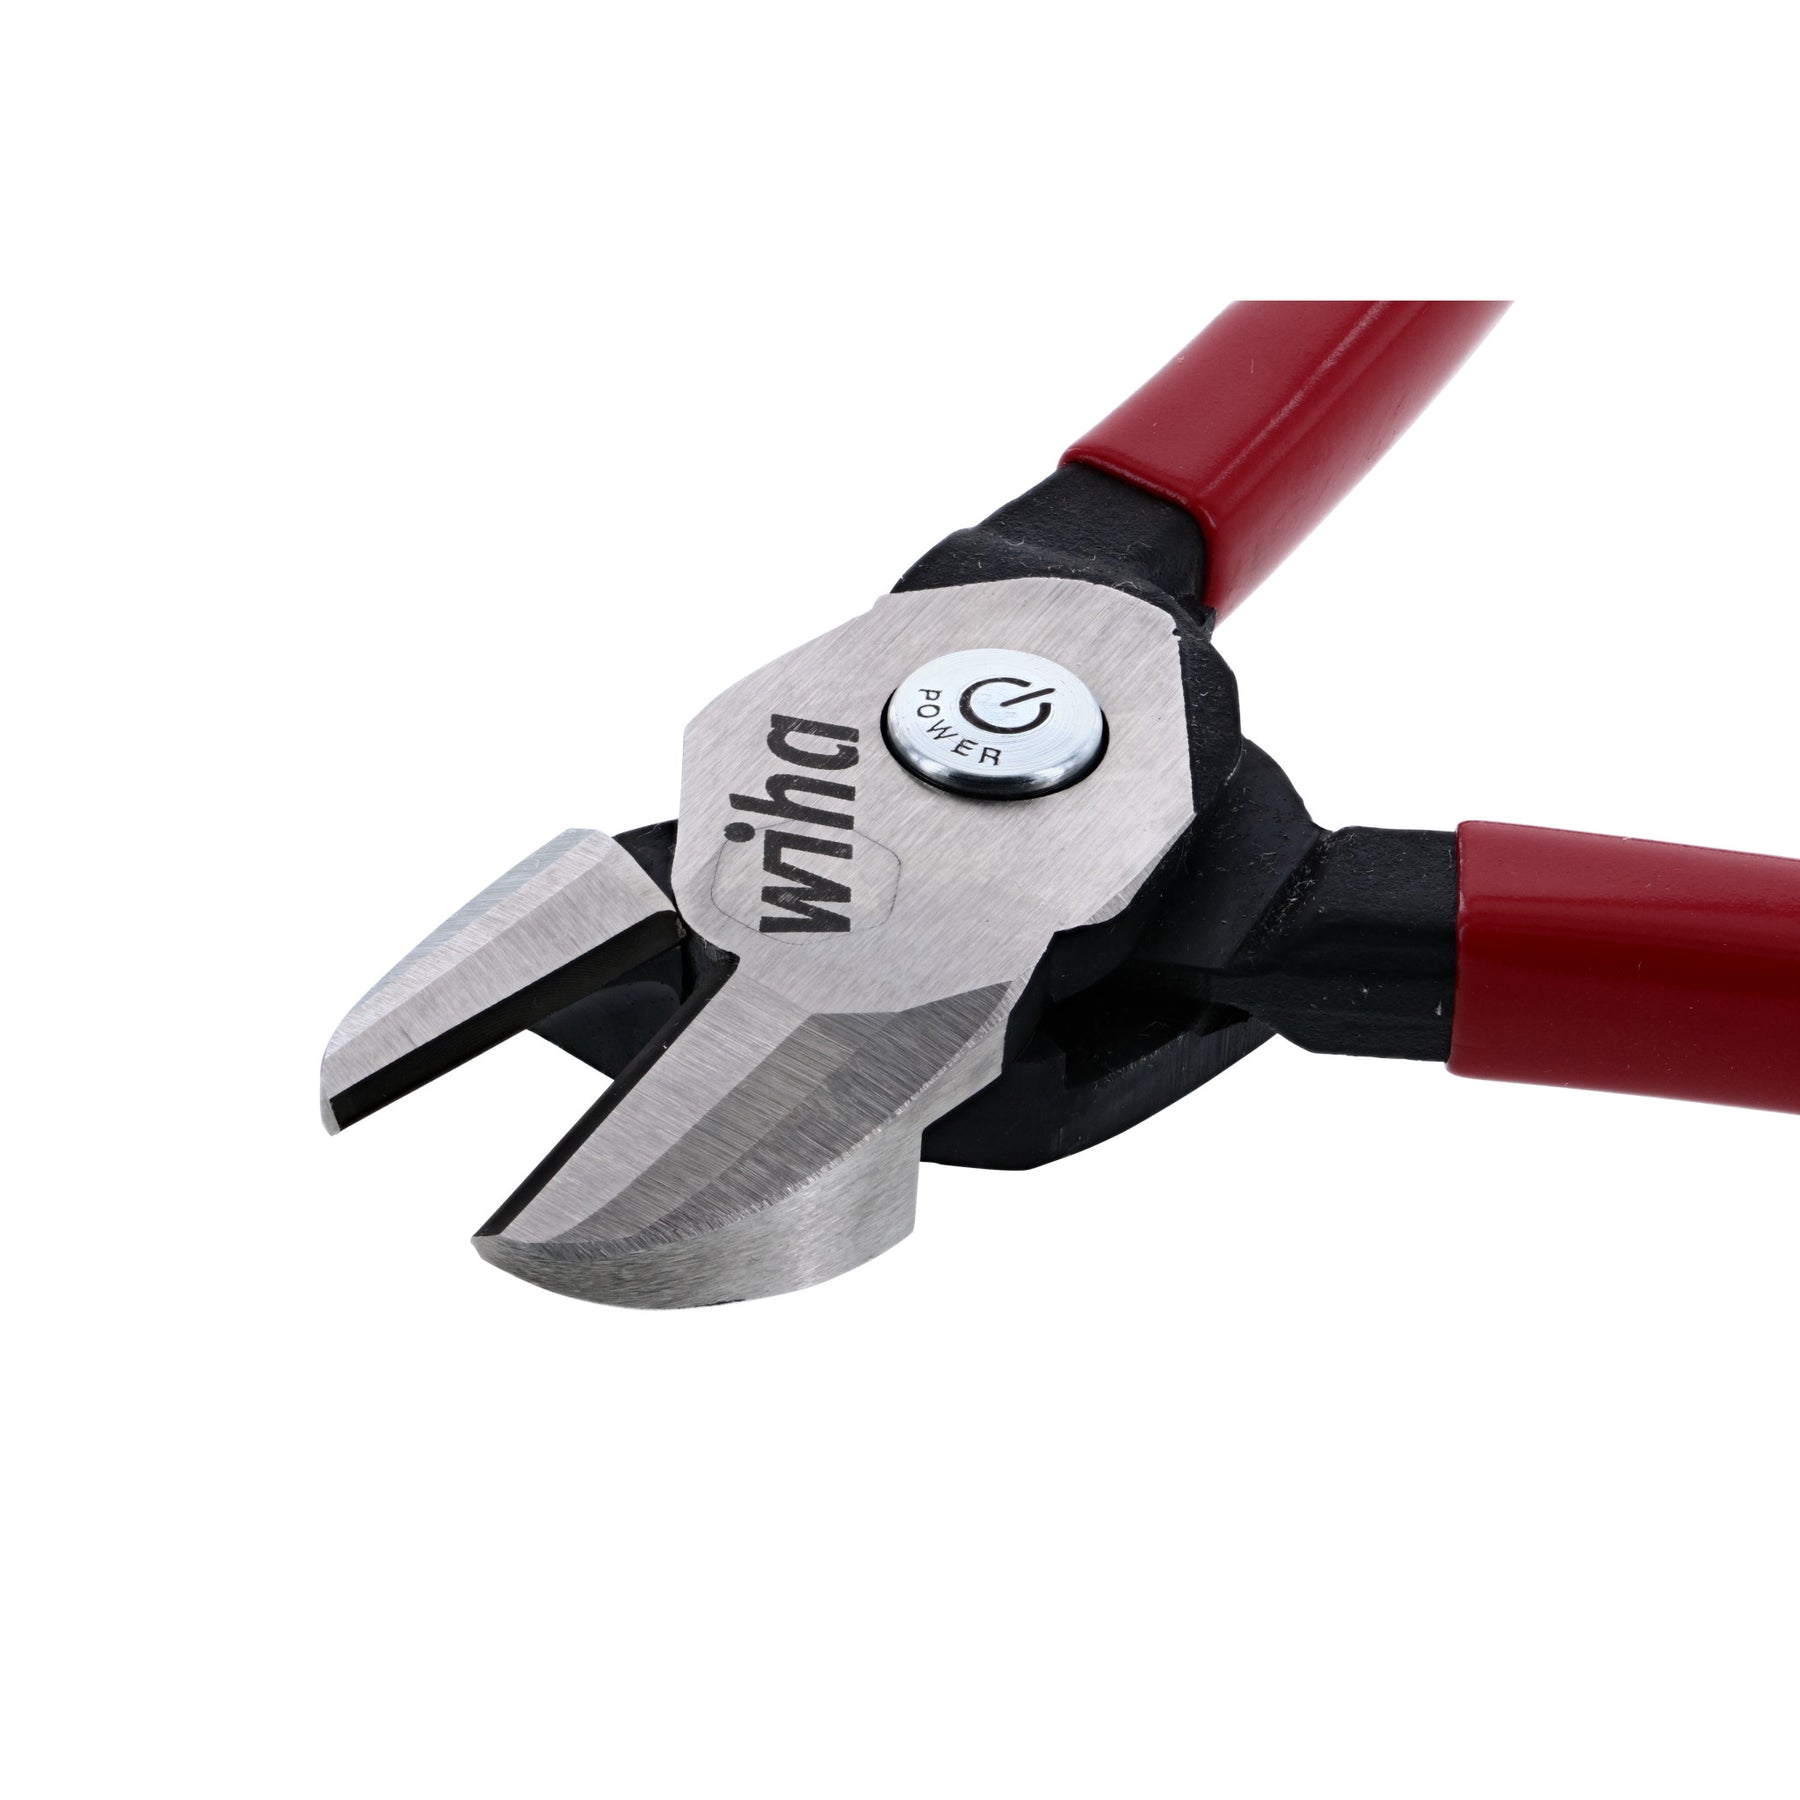 Wiha Z 36 0 01 Precision Mechanics Nose Pliers with Side Cutter and Spring 160mm Basic Mechanics Nose Pliers